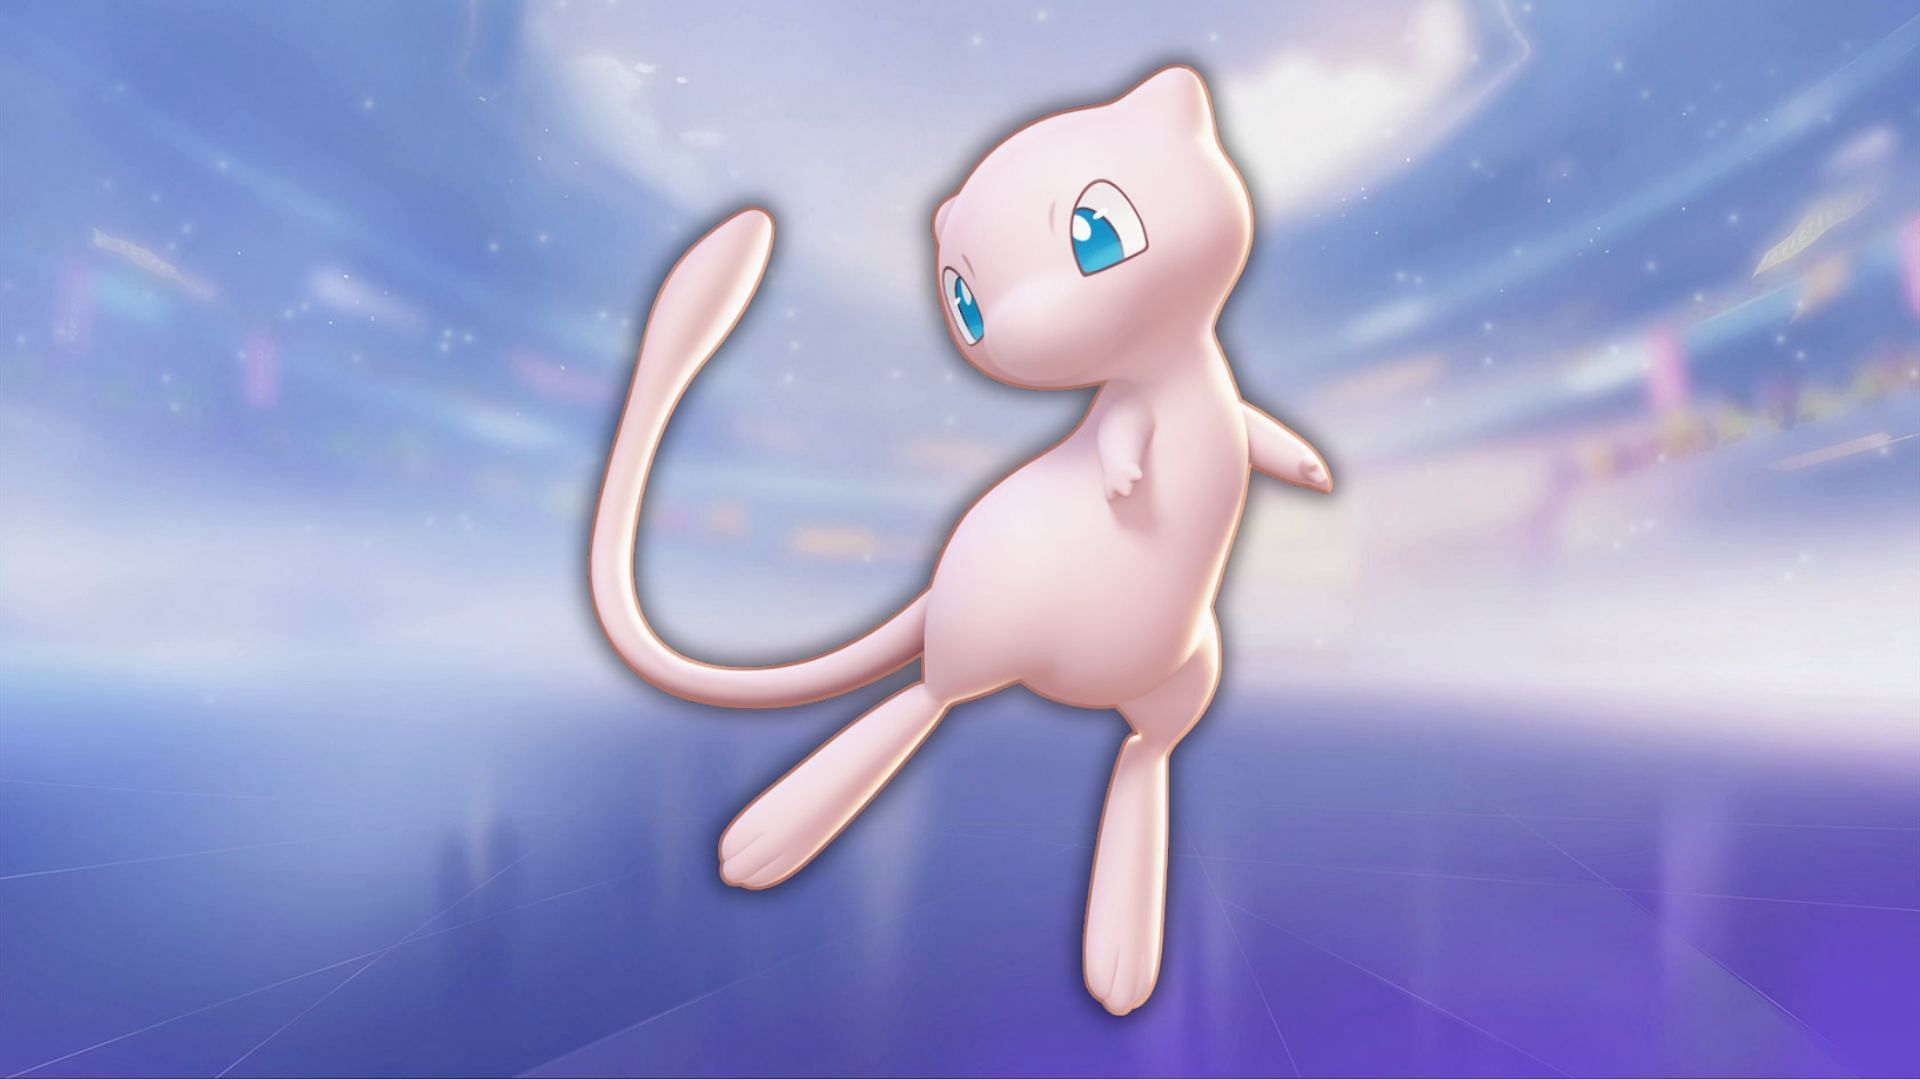 Mew in Pokemon Unite can have a huge impact from a safe distance (Image via The Pokemon Company)